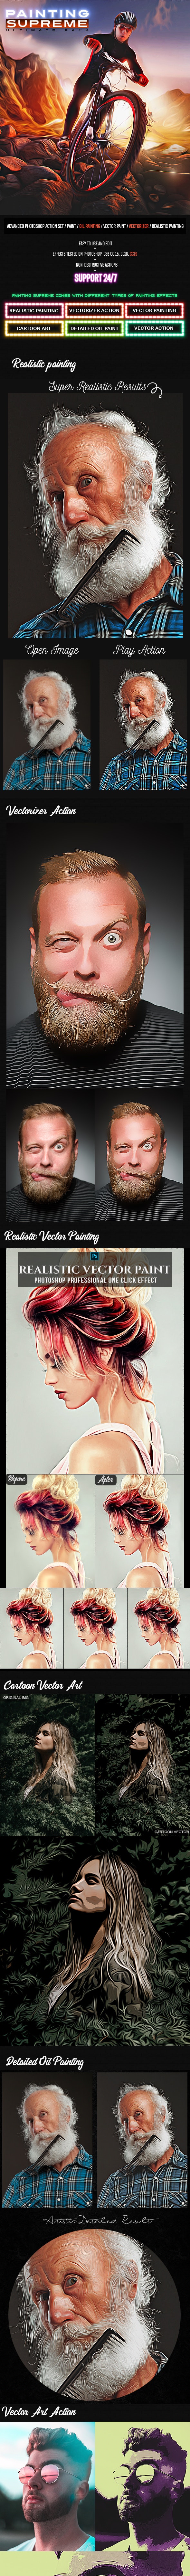 Supreme Painting Photoshop Actions